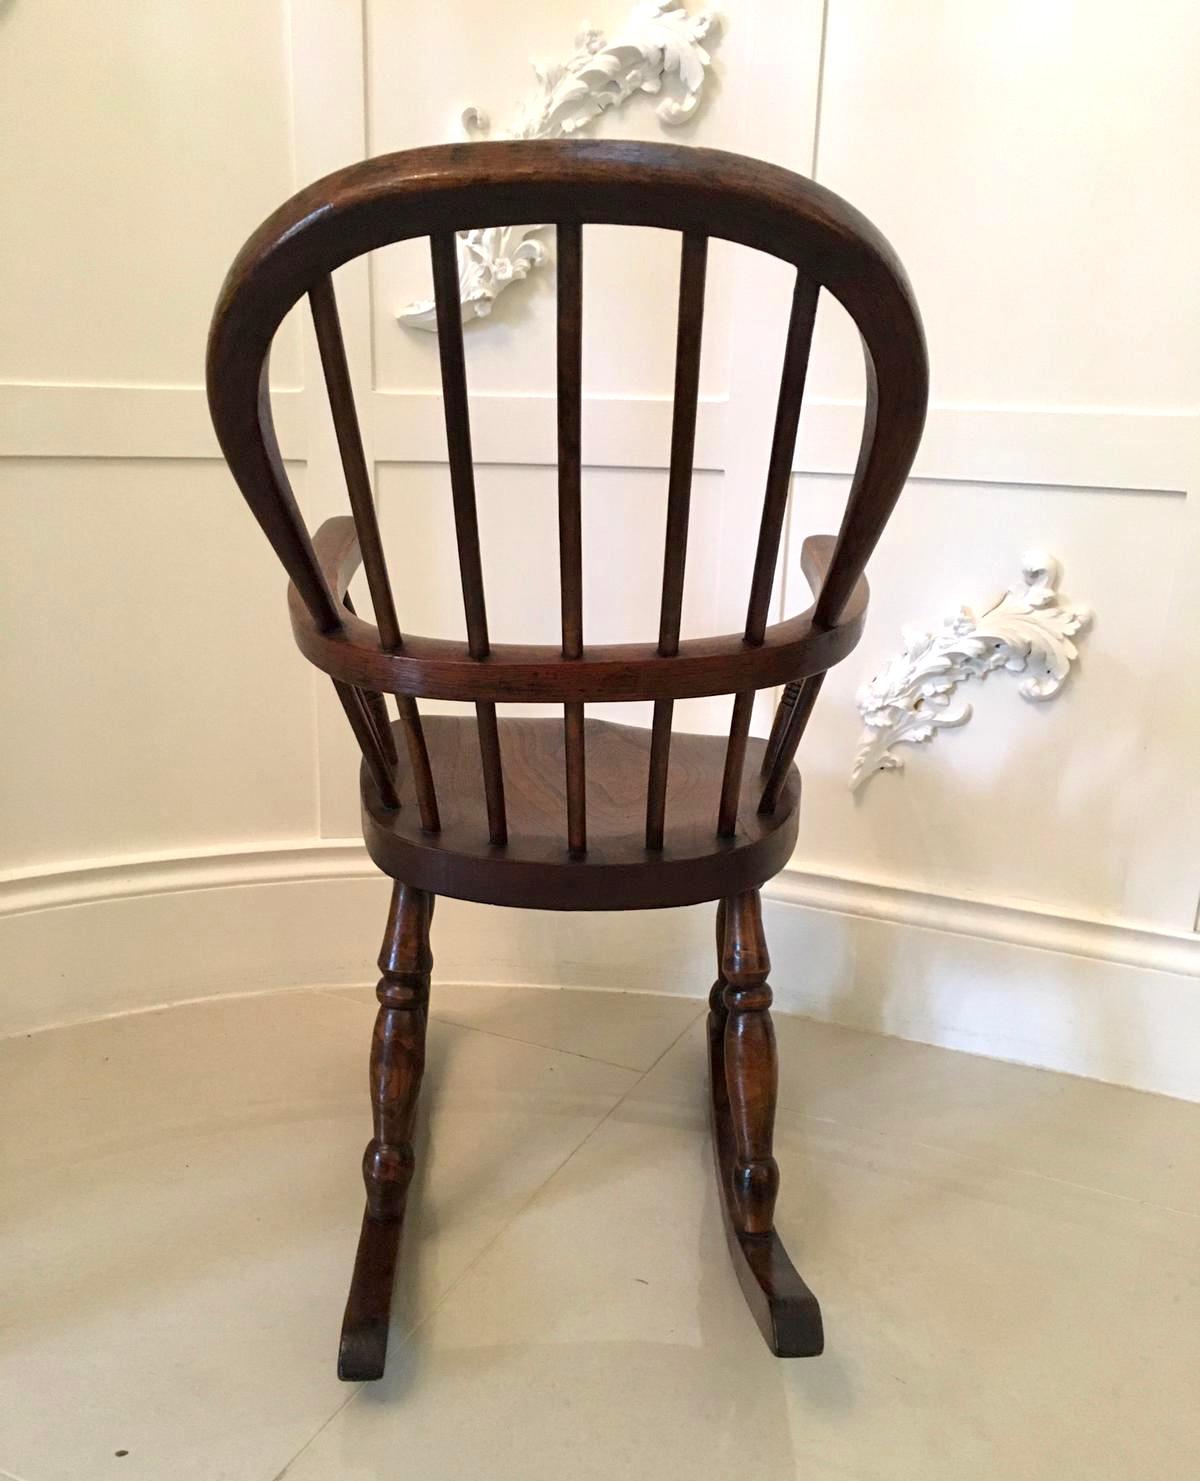 19th century antique elm and ash childs Windsor rocking chair boasting a wonderful shaped turned stick back with shaped arms supported by turned columns. The seat is crafted in solid ash and is raised on four turned legs supported on original shaped